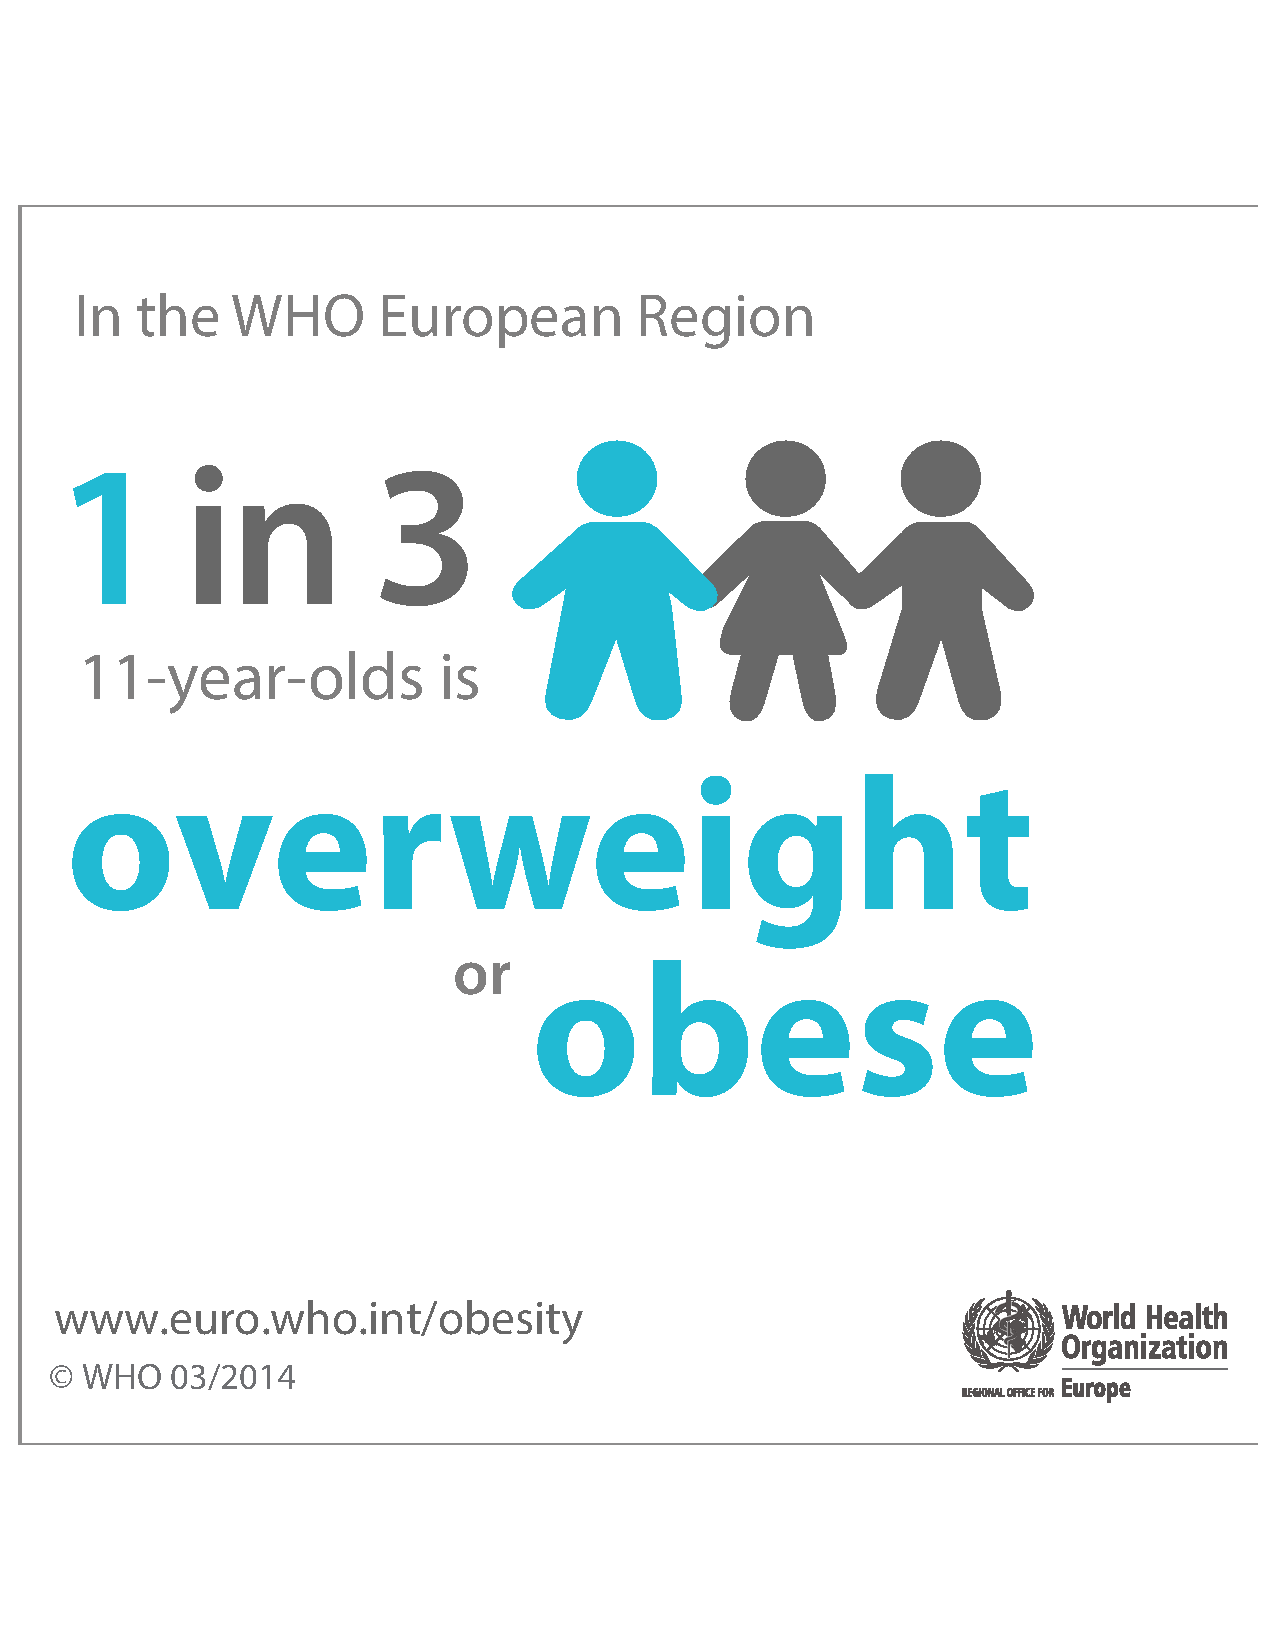 1 in 3 11-year-olds is overweight or obese